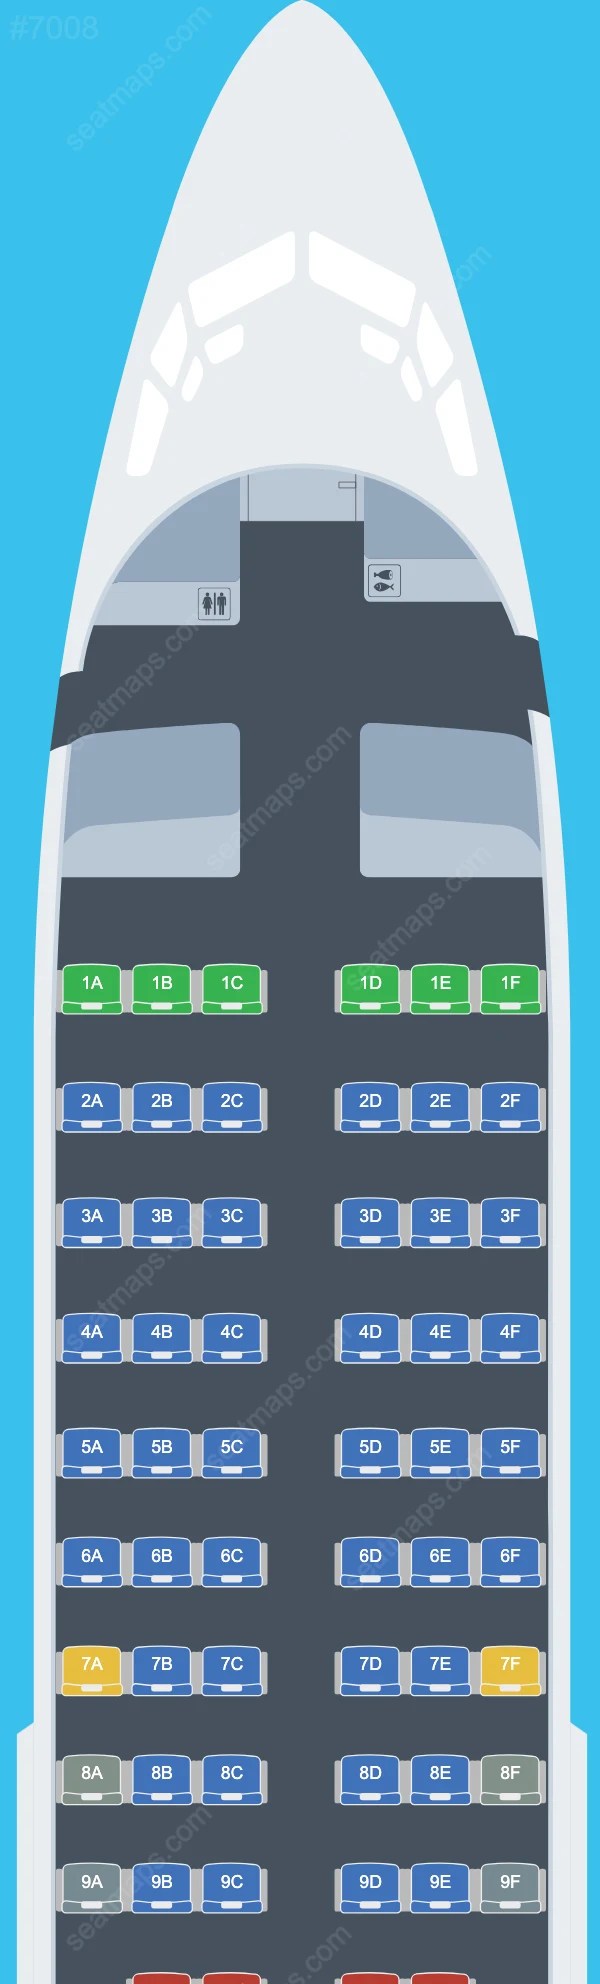 Lucky Air Boeing 737 Seat Maps 737-700 V.3